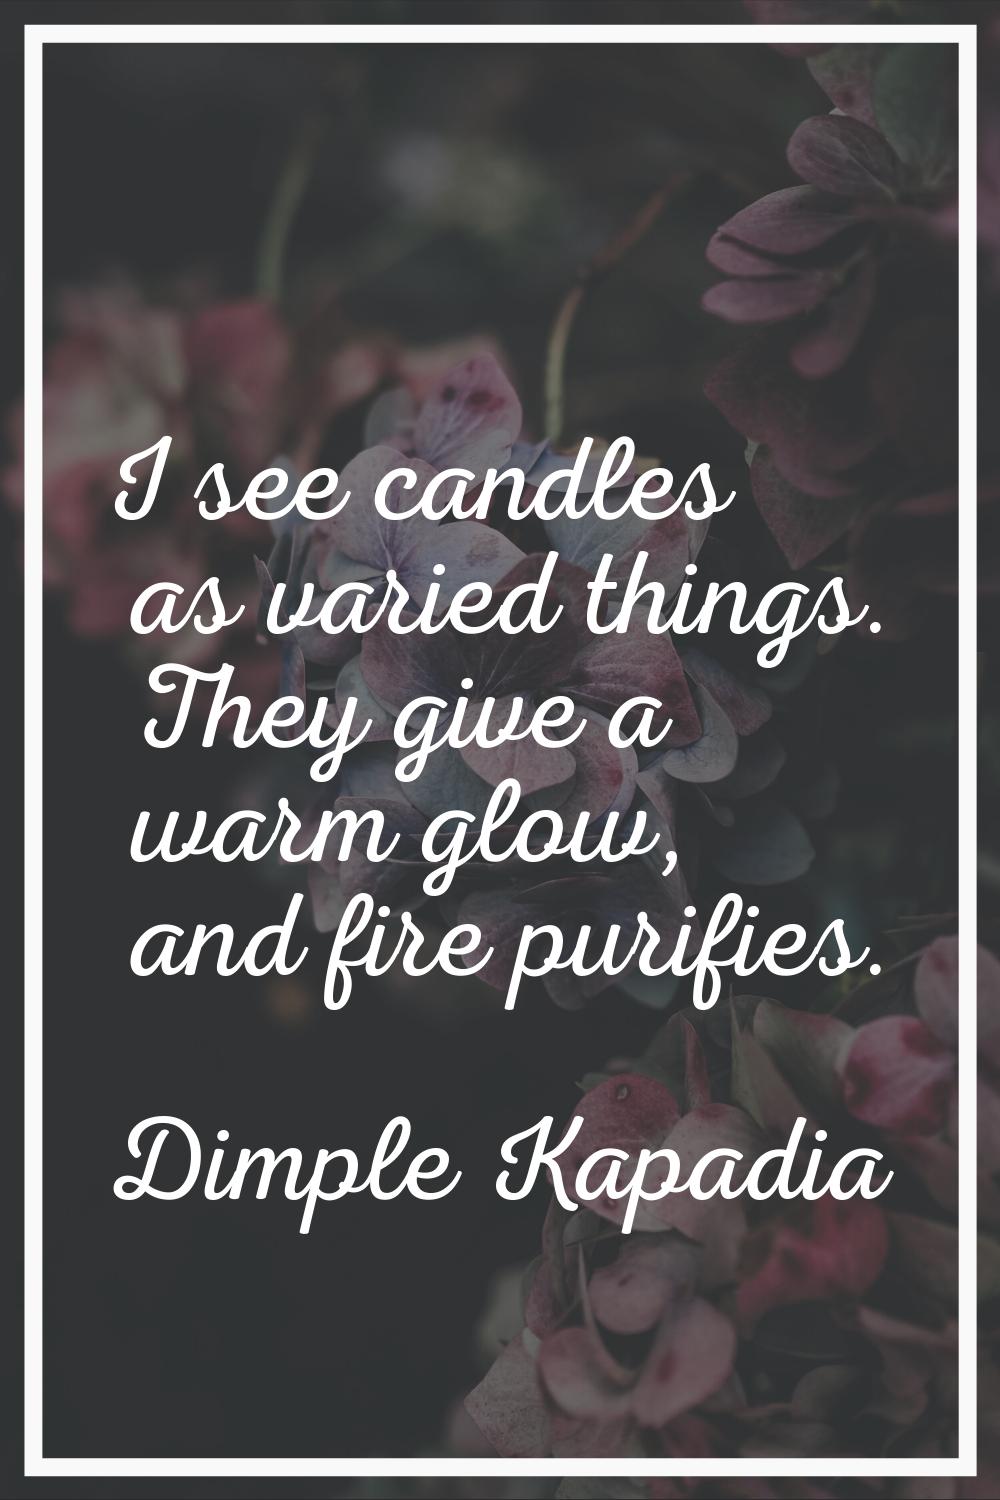 I see candles as varied things. They give a warm glow, and fire purifies.